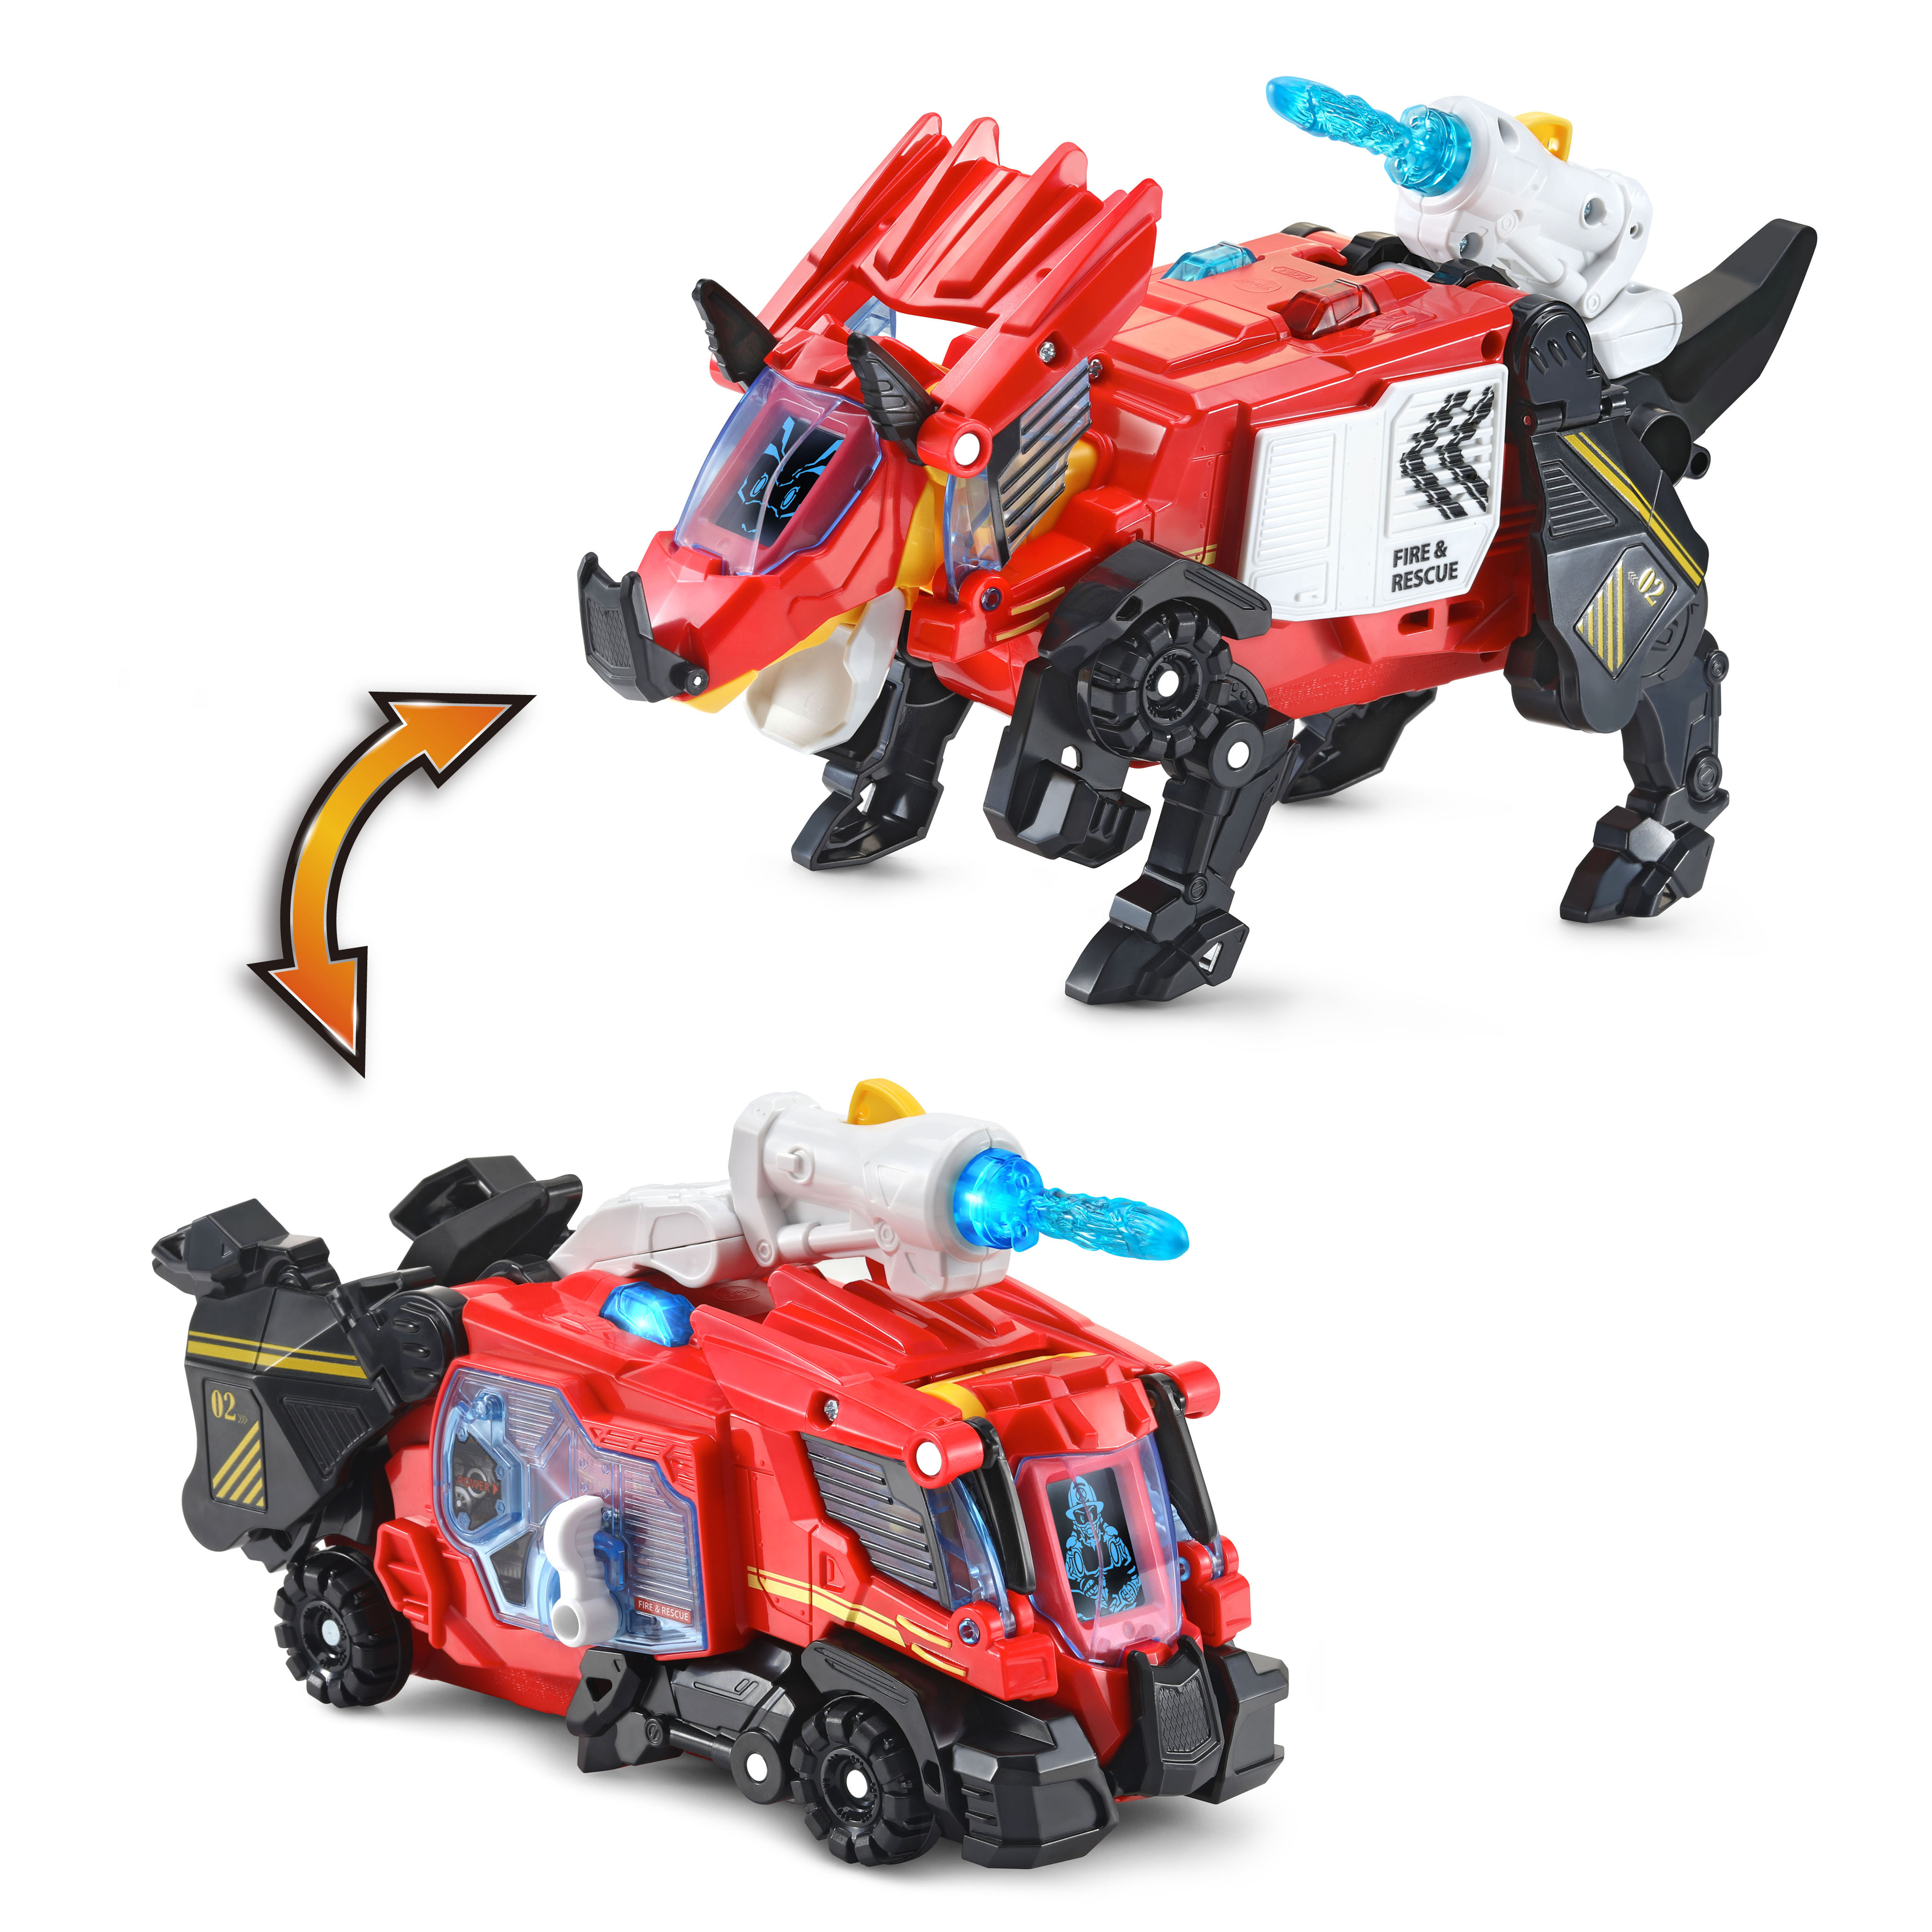 VTech® Switch & Go® 3-in-1 Rescue Rex With Police Car, Fire Truck